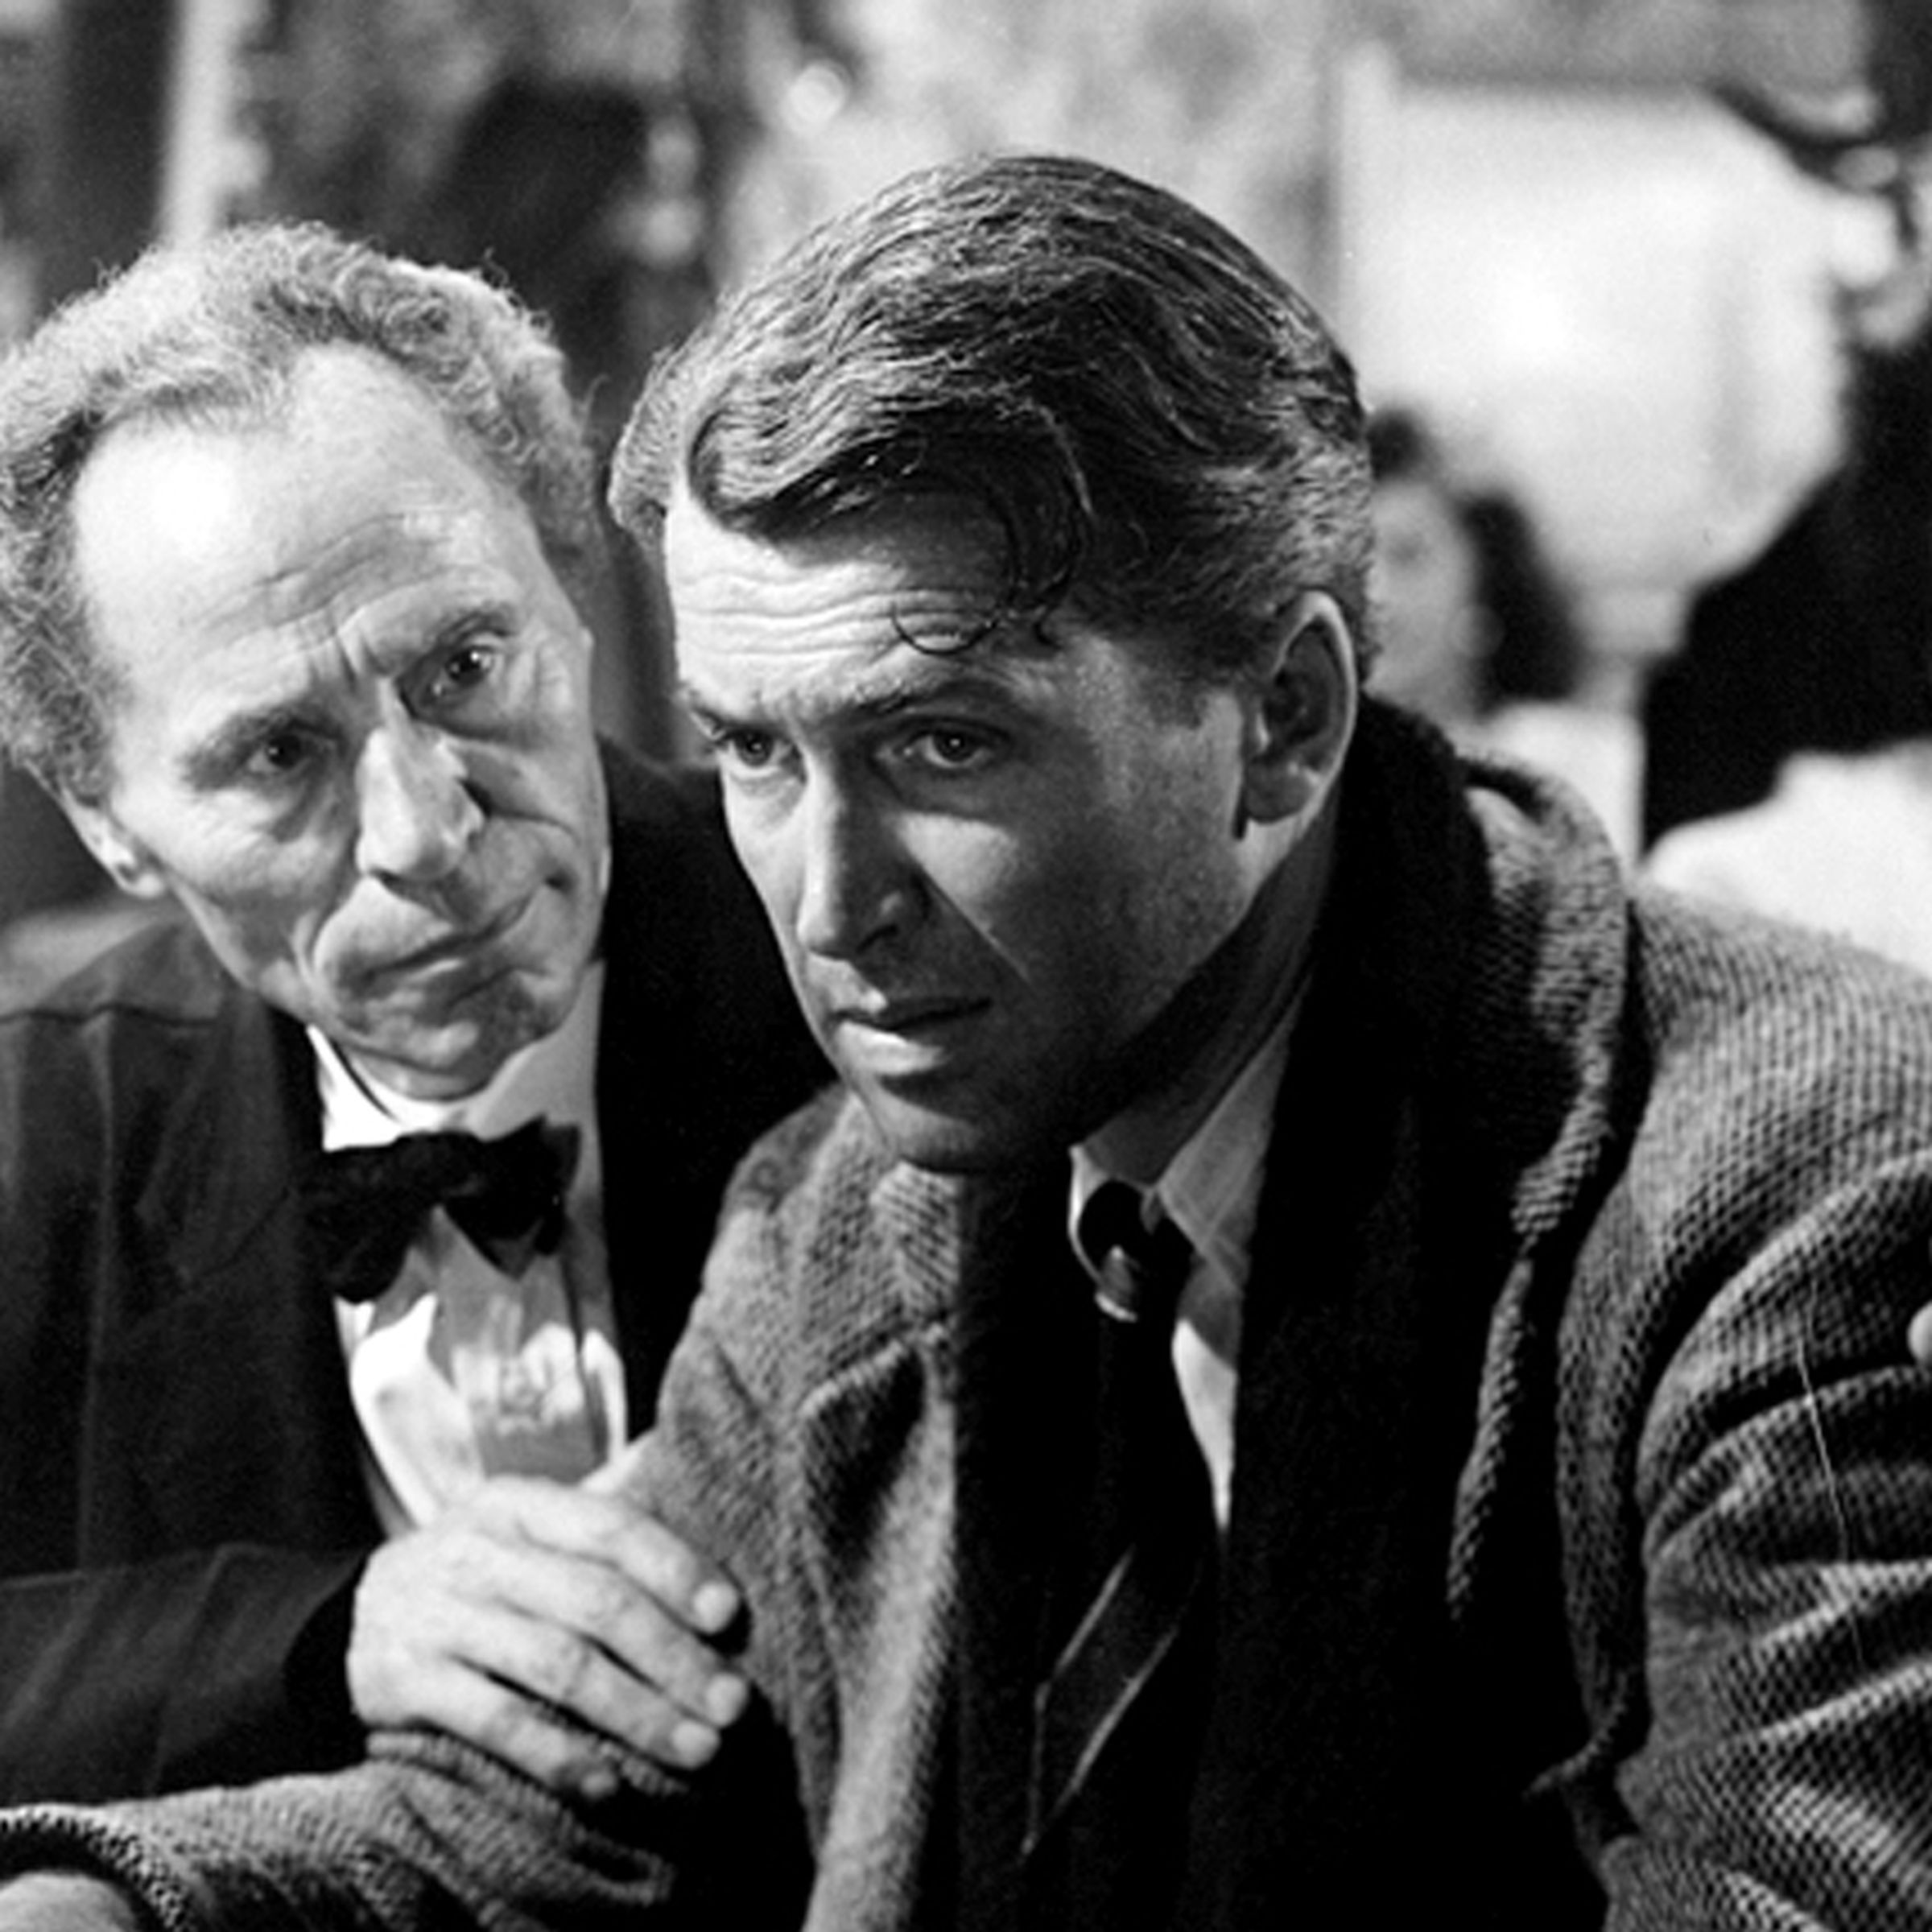 A man in a wool jacket and a scarf being comforted by another man in a wool jacket and a bowtie. Both men are standing at a brightly-lit bar or at a restaurant.